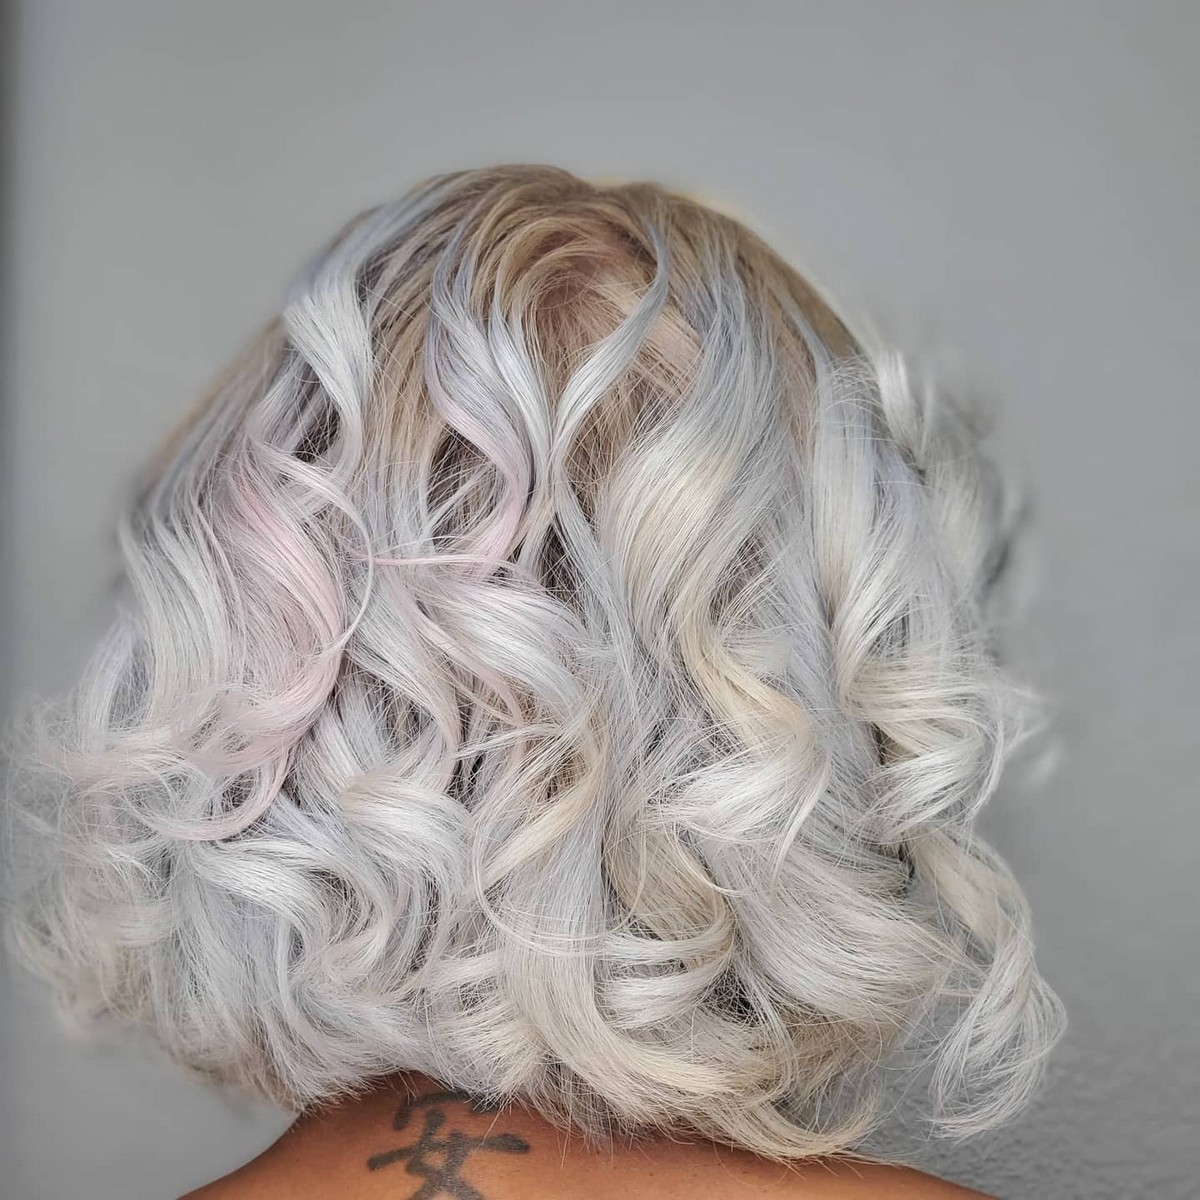 Cotton Candy Curly Gray Bob